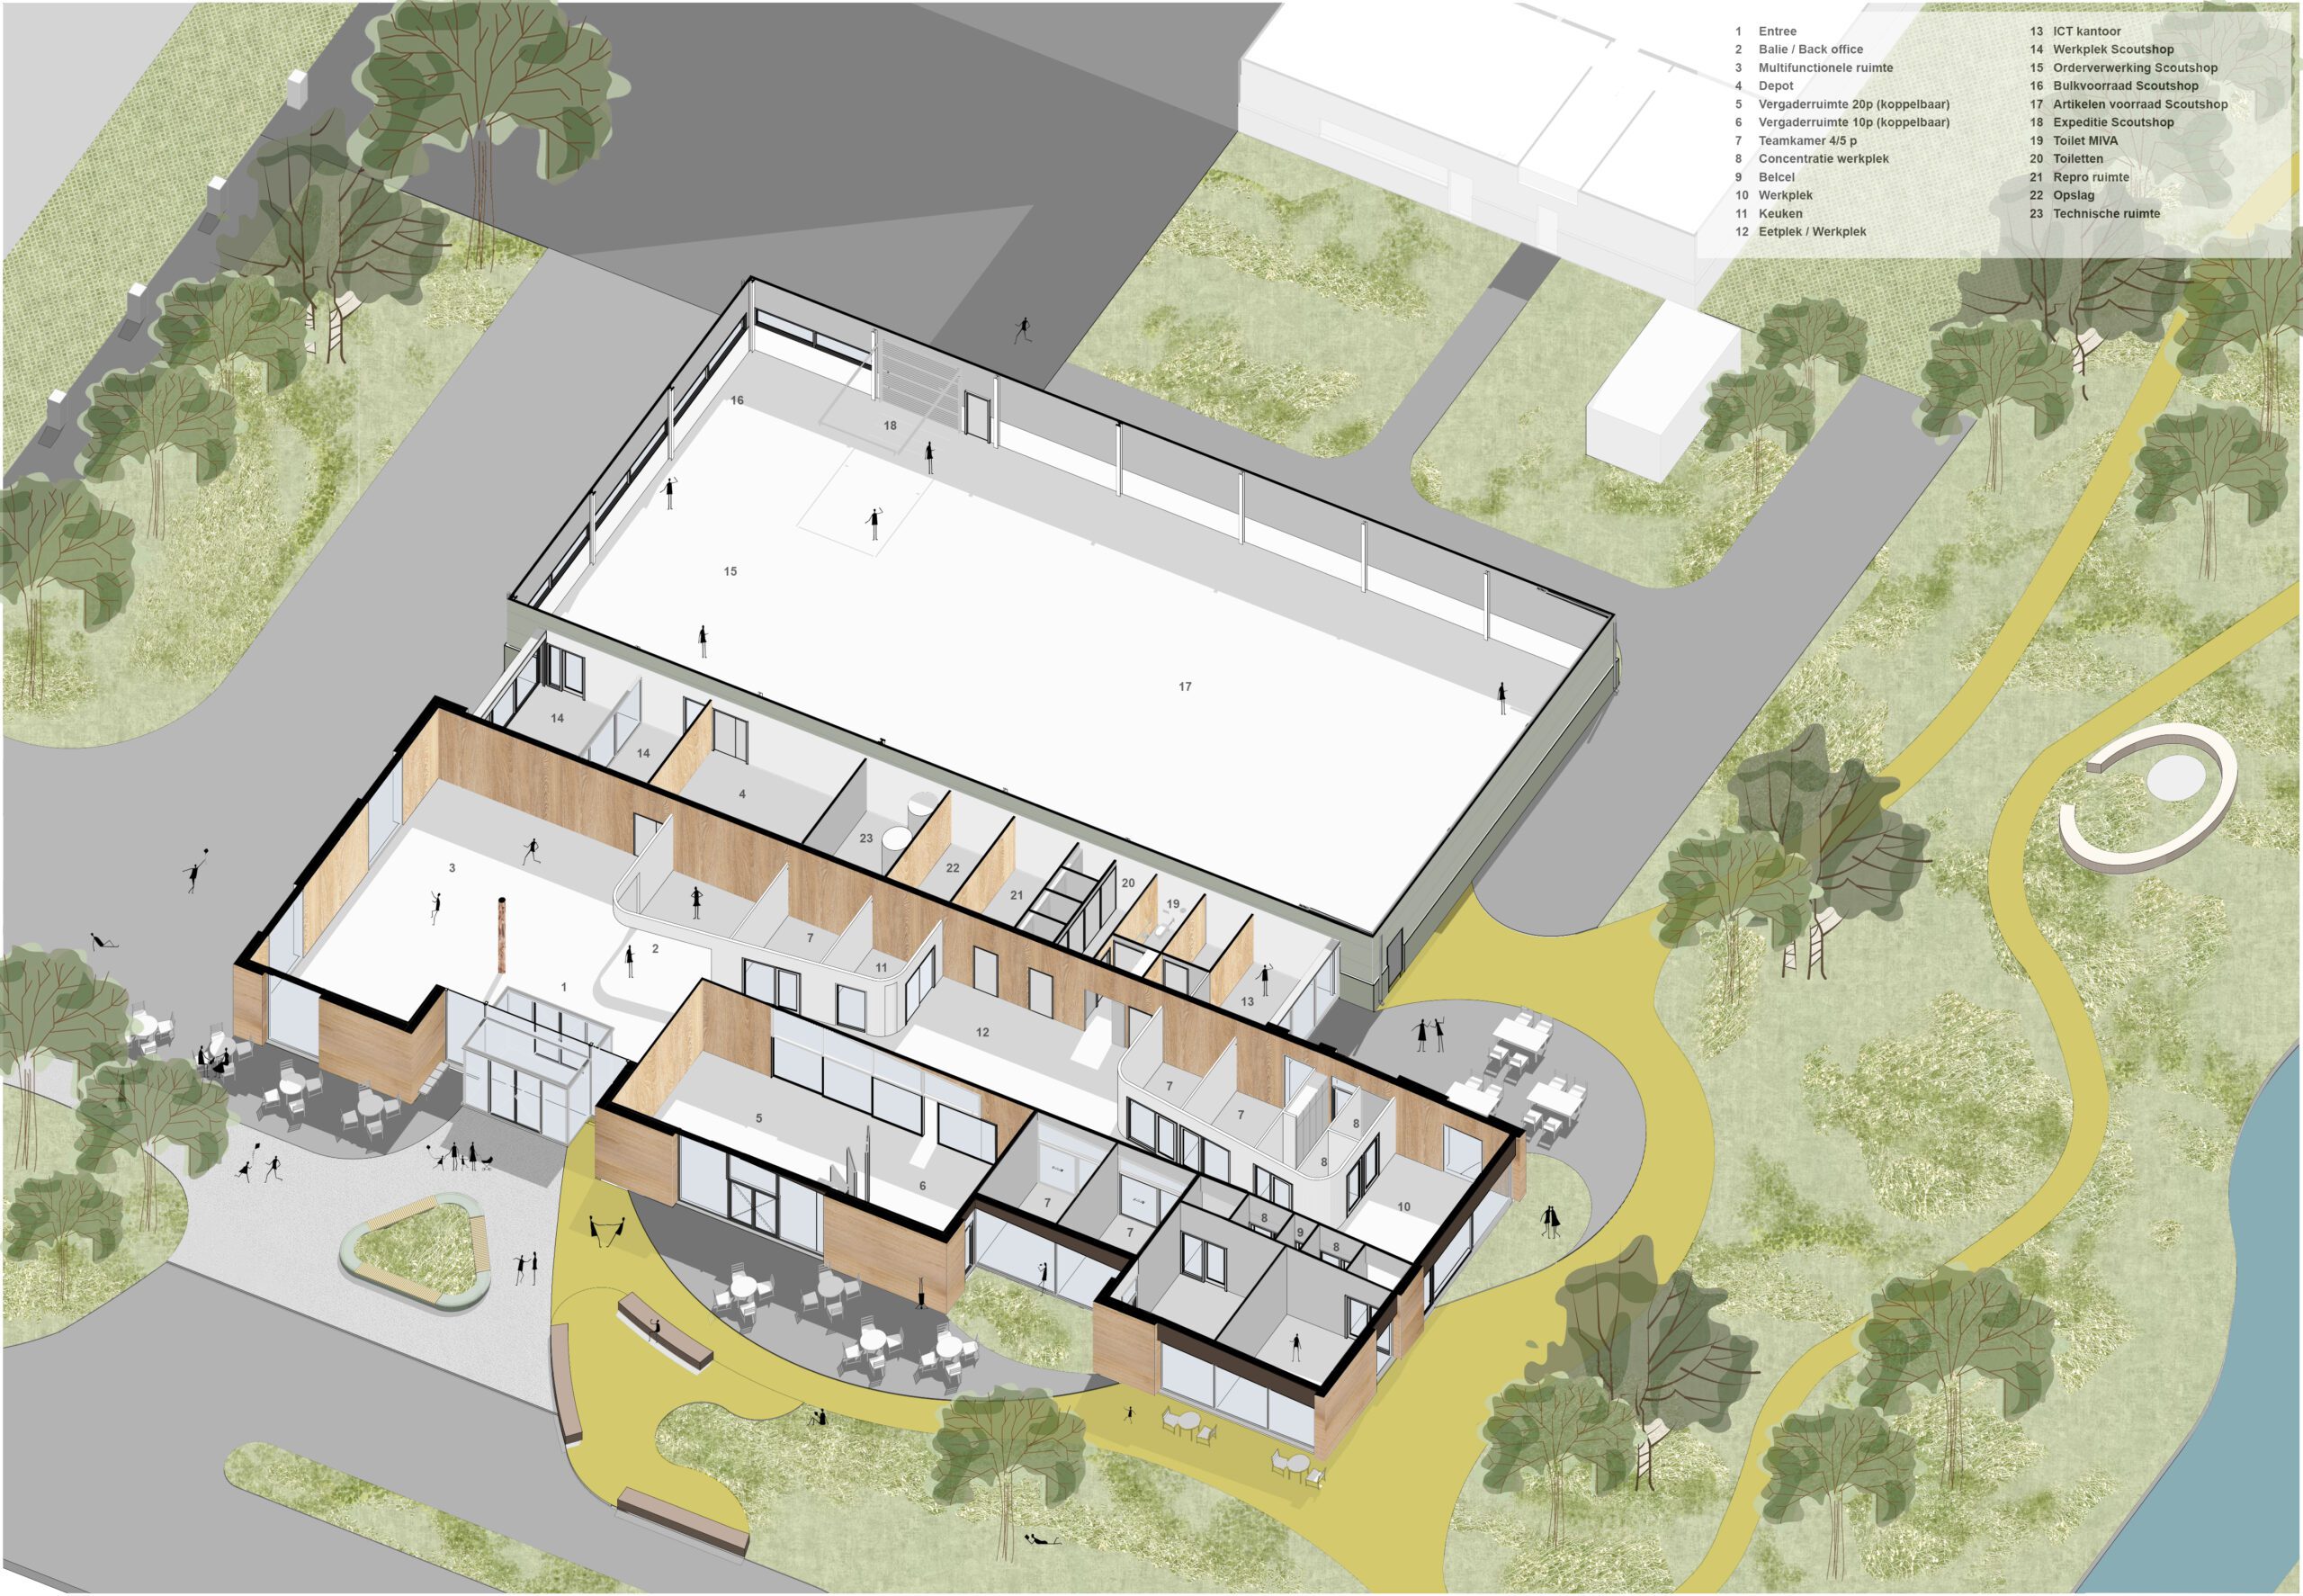 Sectional axonometric drawing showing an overview of the preliminary design, including the workspace, meeting rooms, exhibition area and storage facilities for the Scouting Basecamp, designed by MOST Architecture.